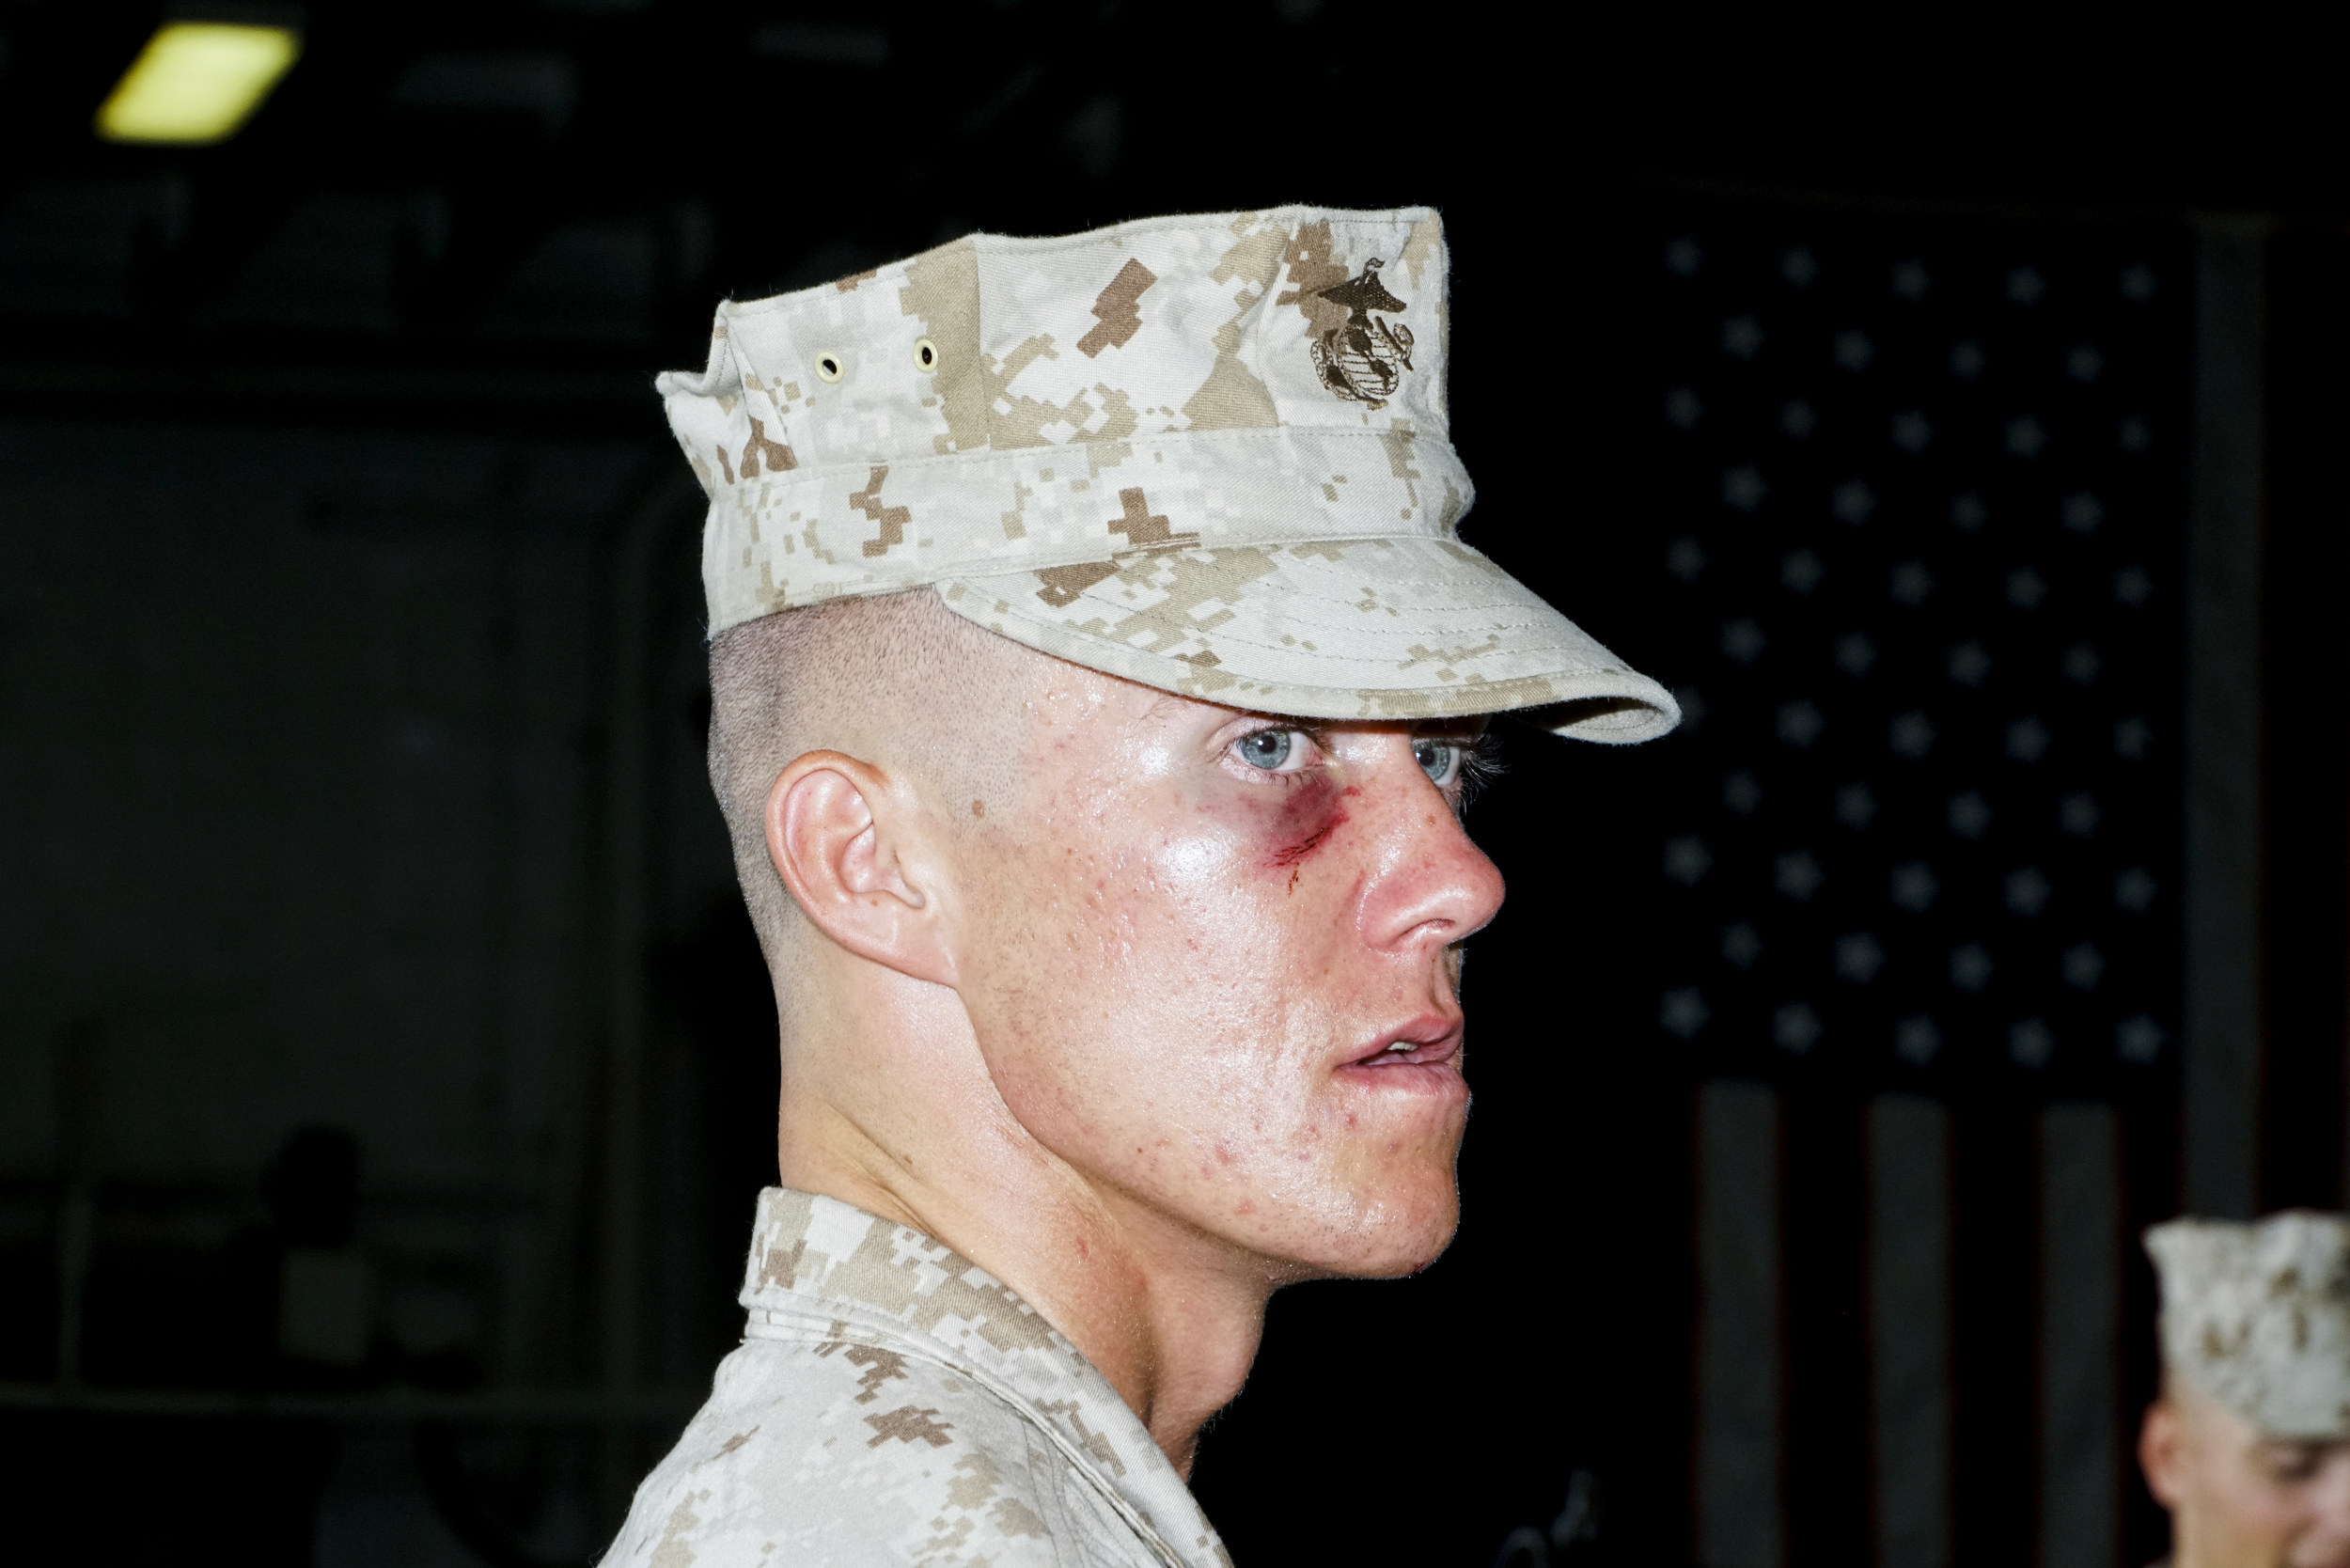 A solider with a black eye